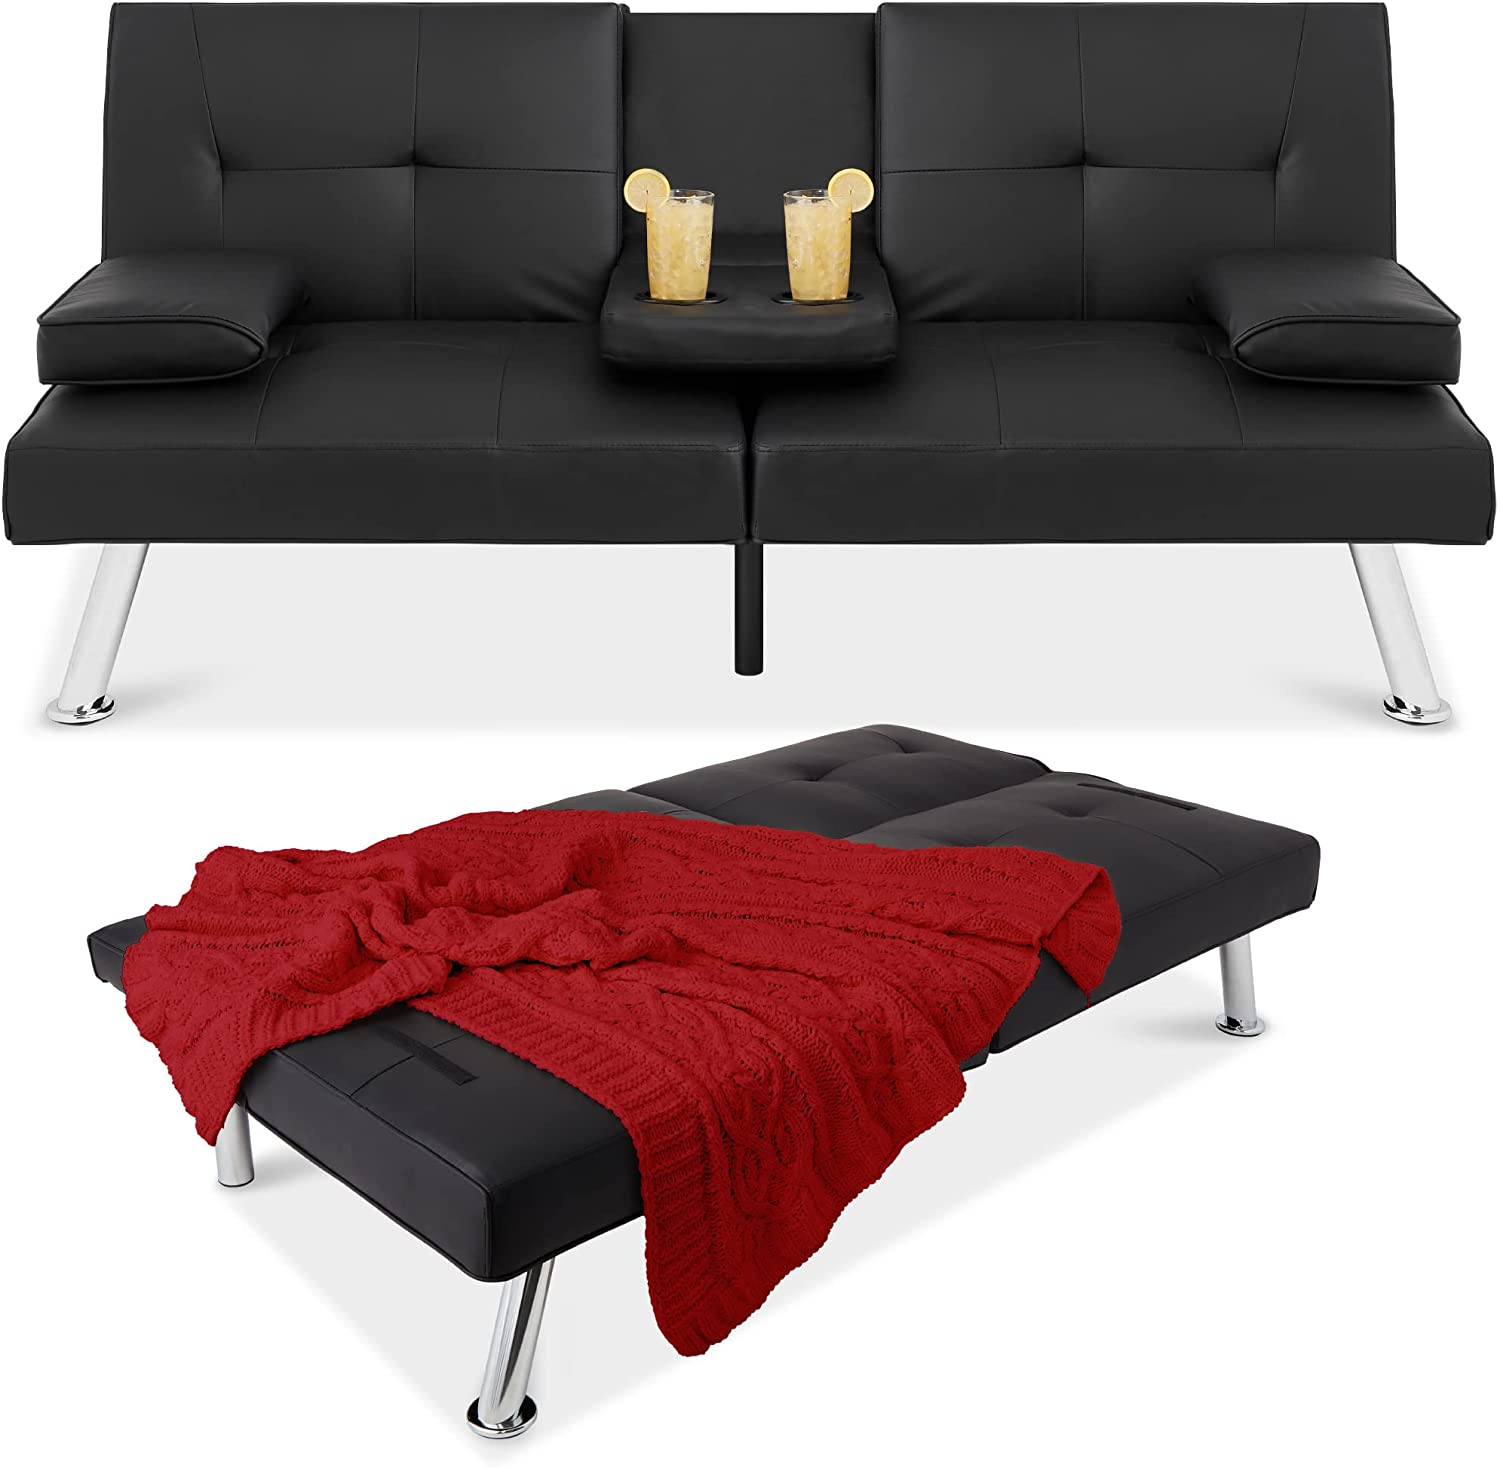 futon for the money review